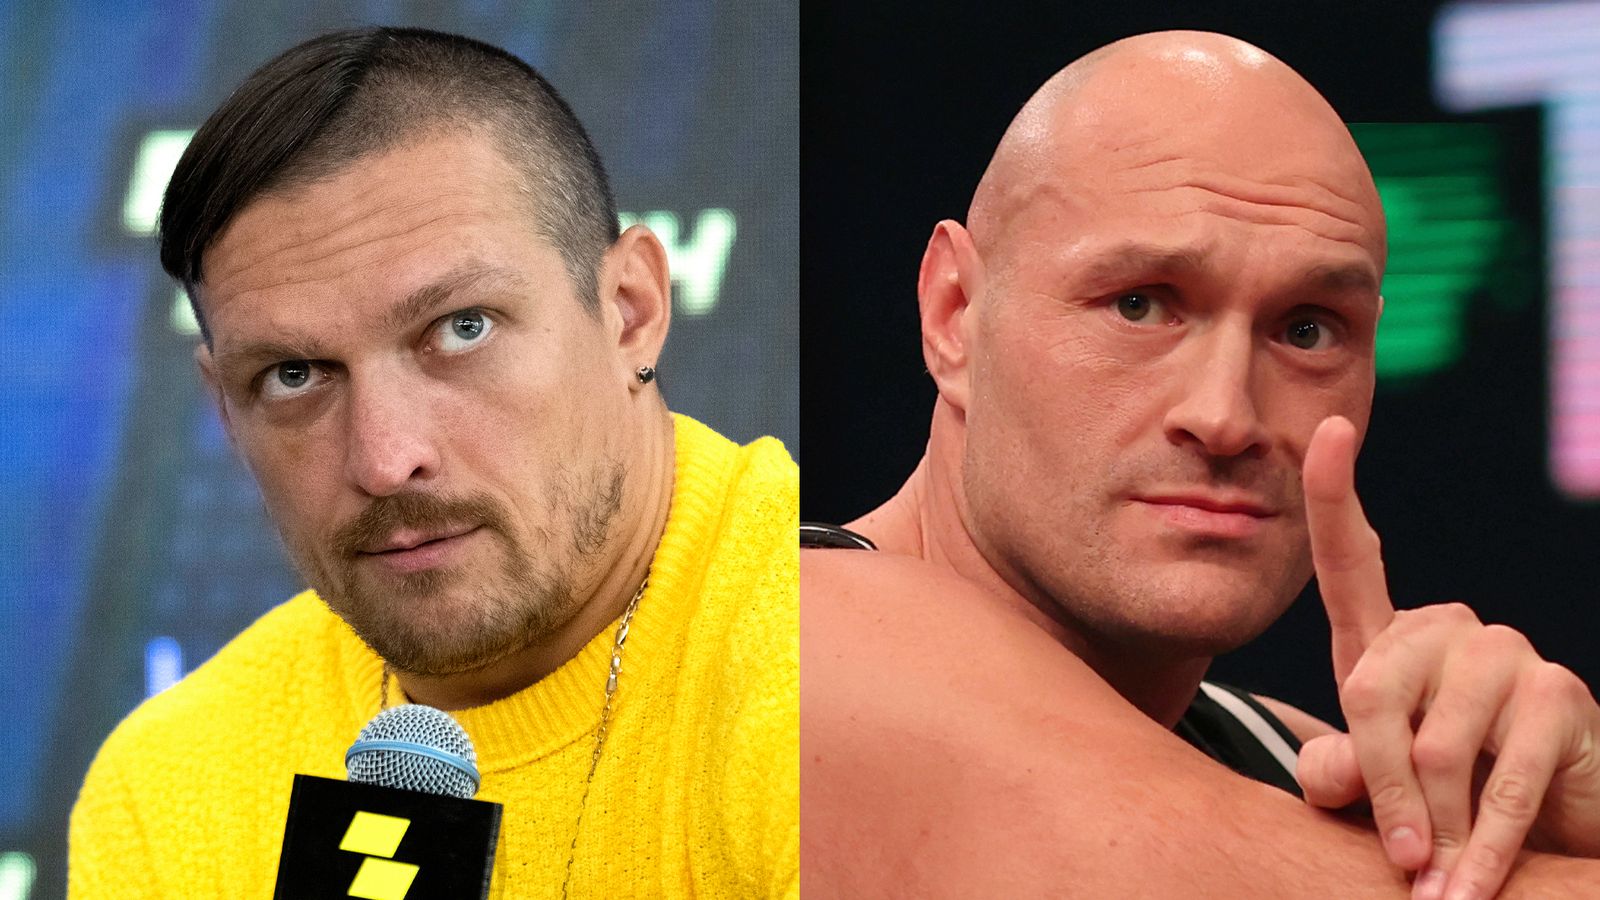 Oleksandr Usyk tells Tyson Fury the clock is ticking for him to agree to undisputed heavyweight title fight Boxing News Sky Sports